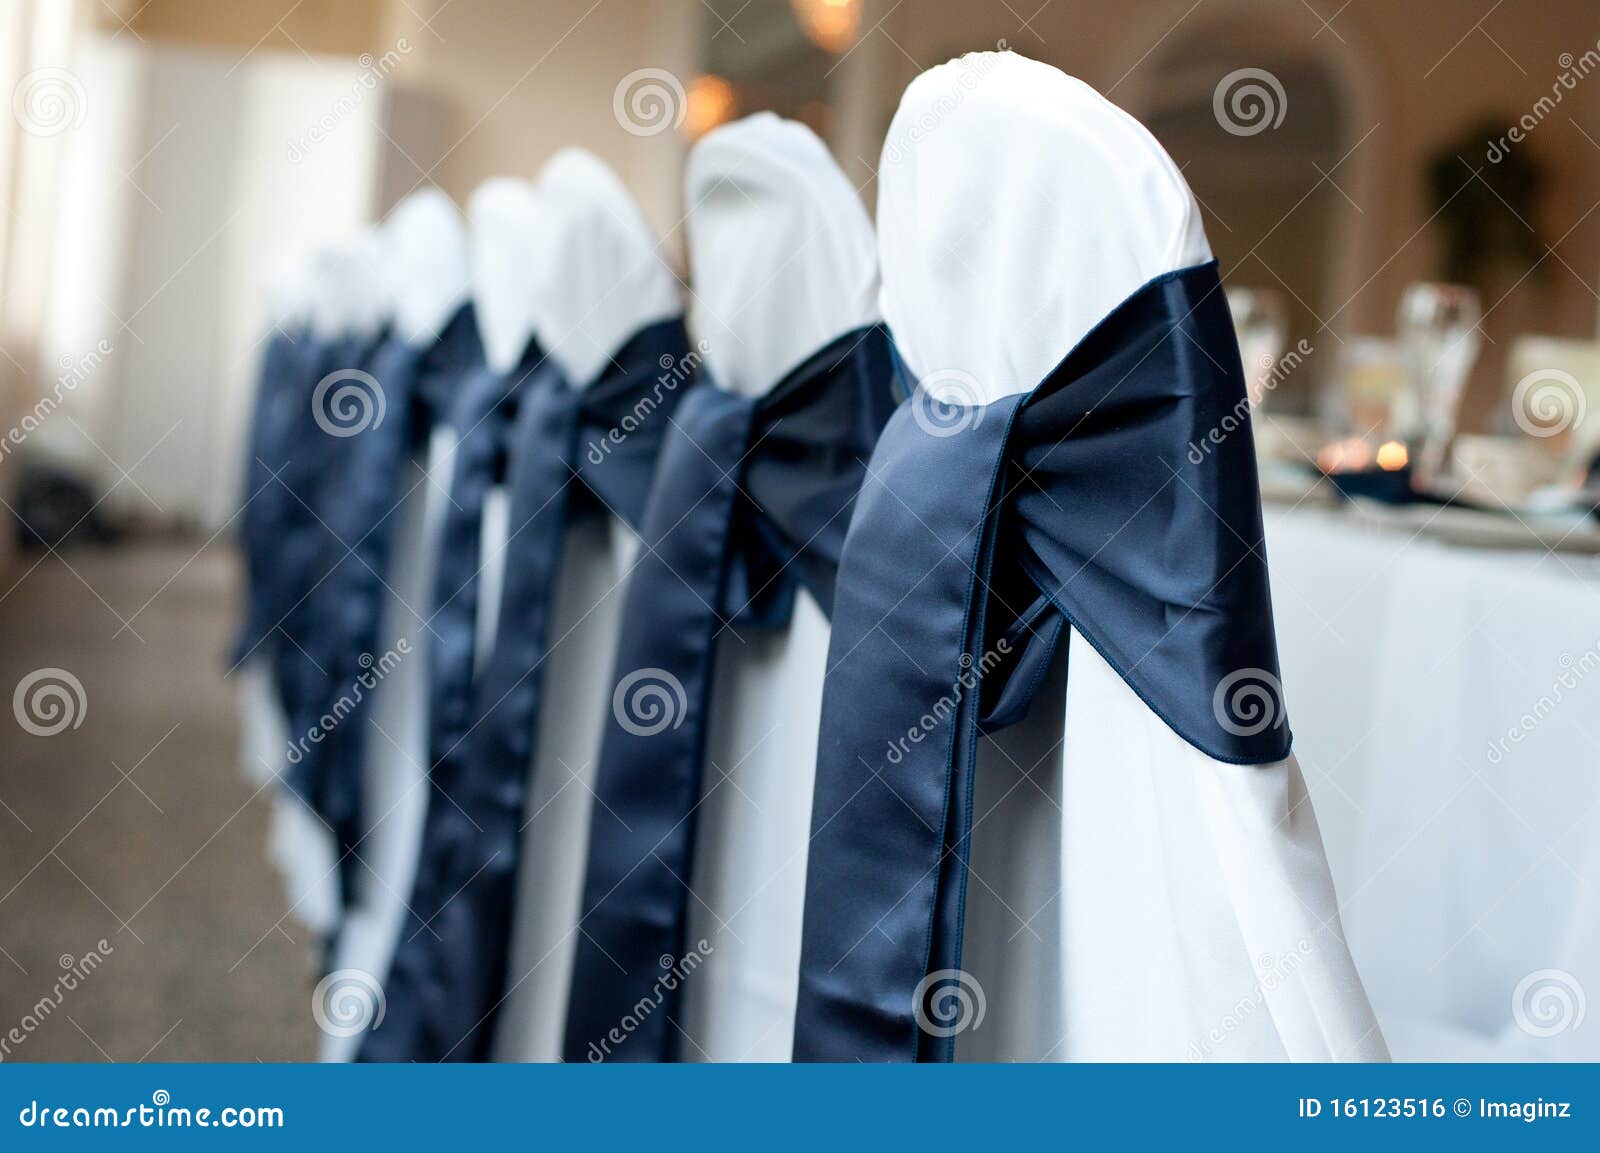 Decorative Chair Covers Stock Photo Image Of Silk Covers 16123516